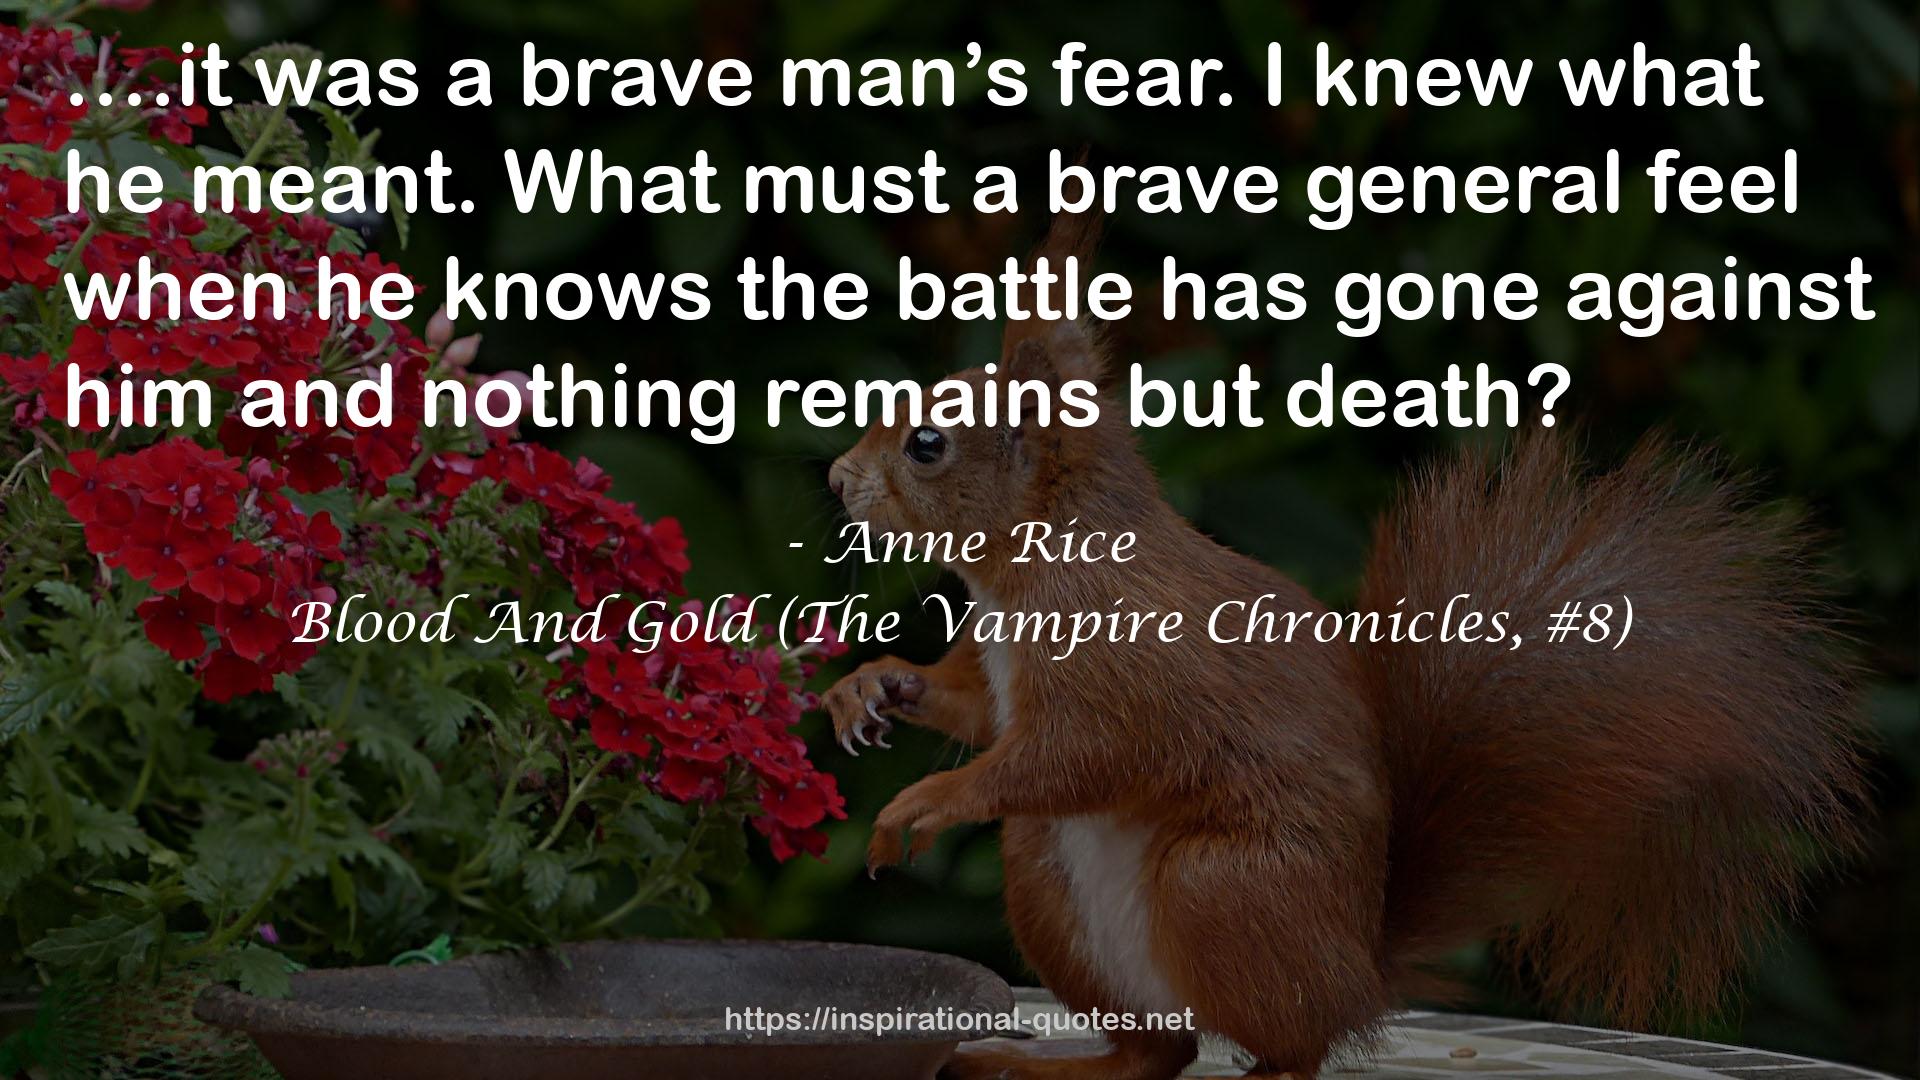 Blood And Gold (The Vampire Chronicles, #8) QUOTES